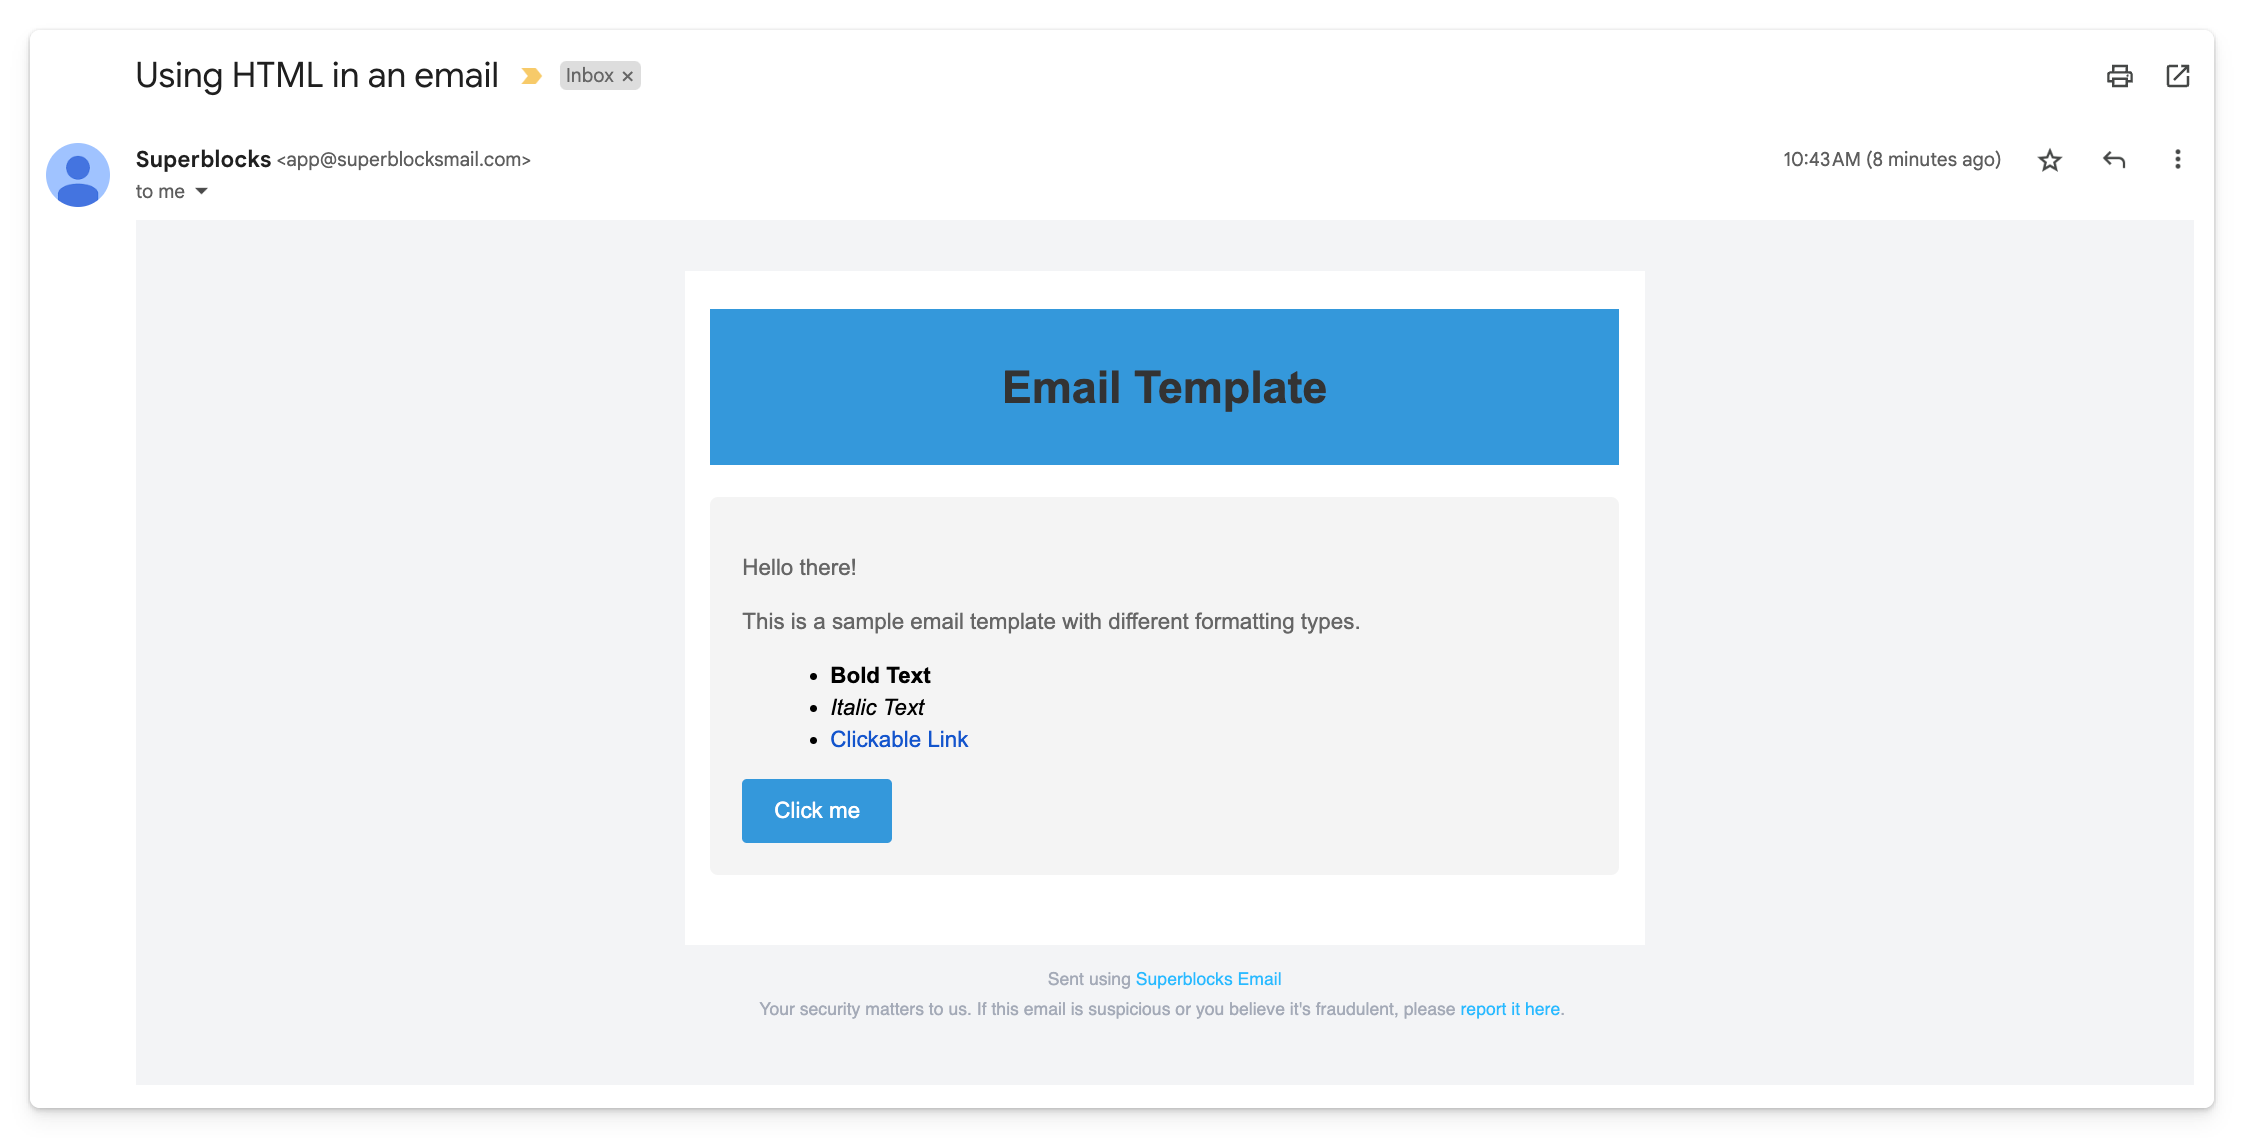 Use HTML to format an email